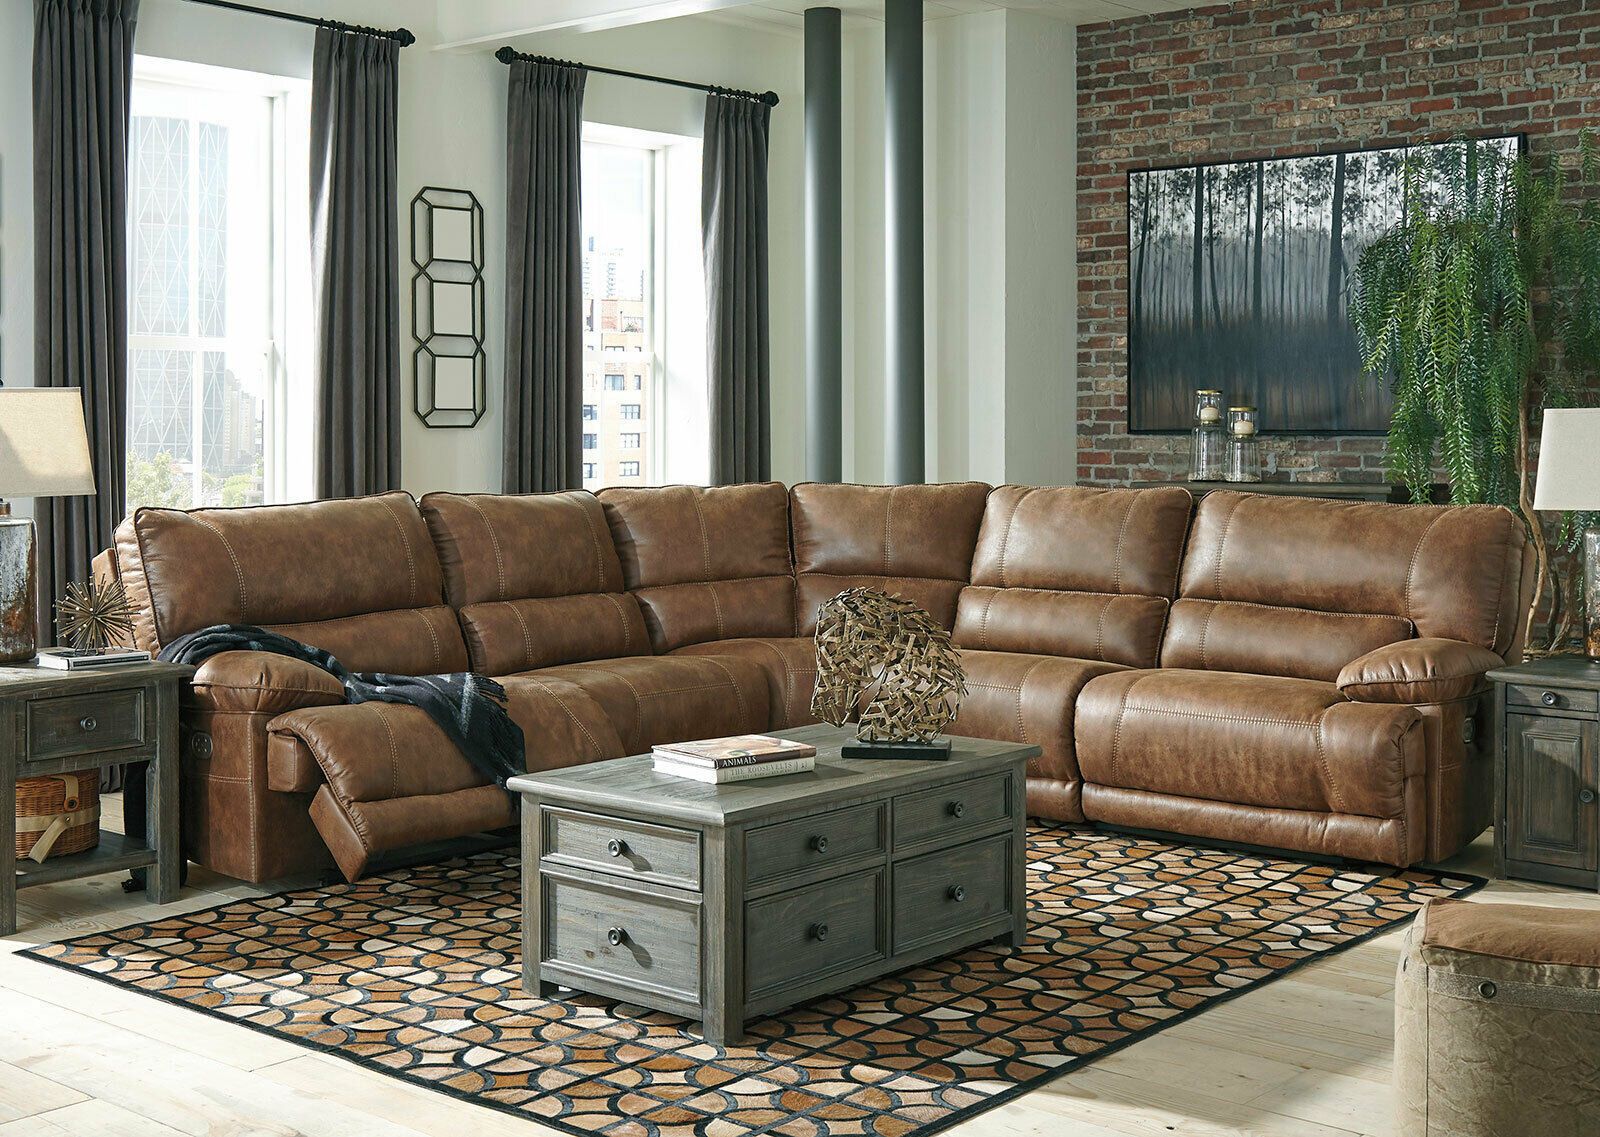 Hamburg 5pcs Sectional Living Room Brown Faux Leather Power Reclining Intended For Faux Leather Sofas In Chocolate Brown (Gallery 13 of 20)